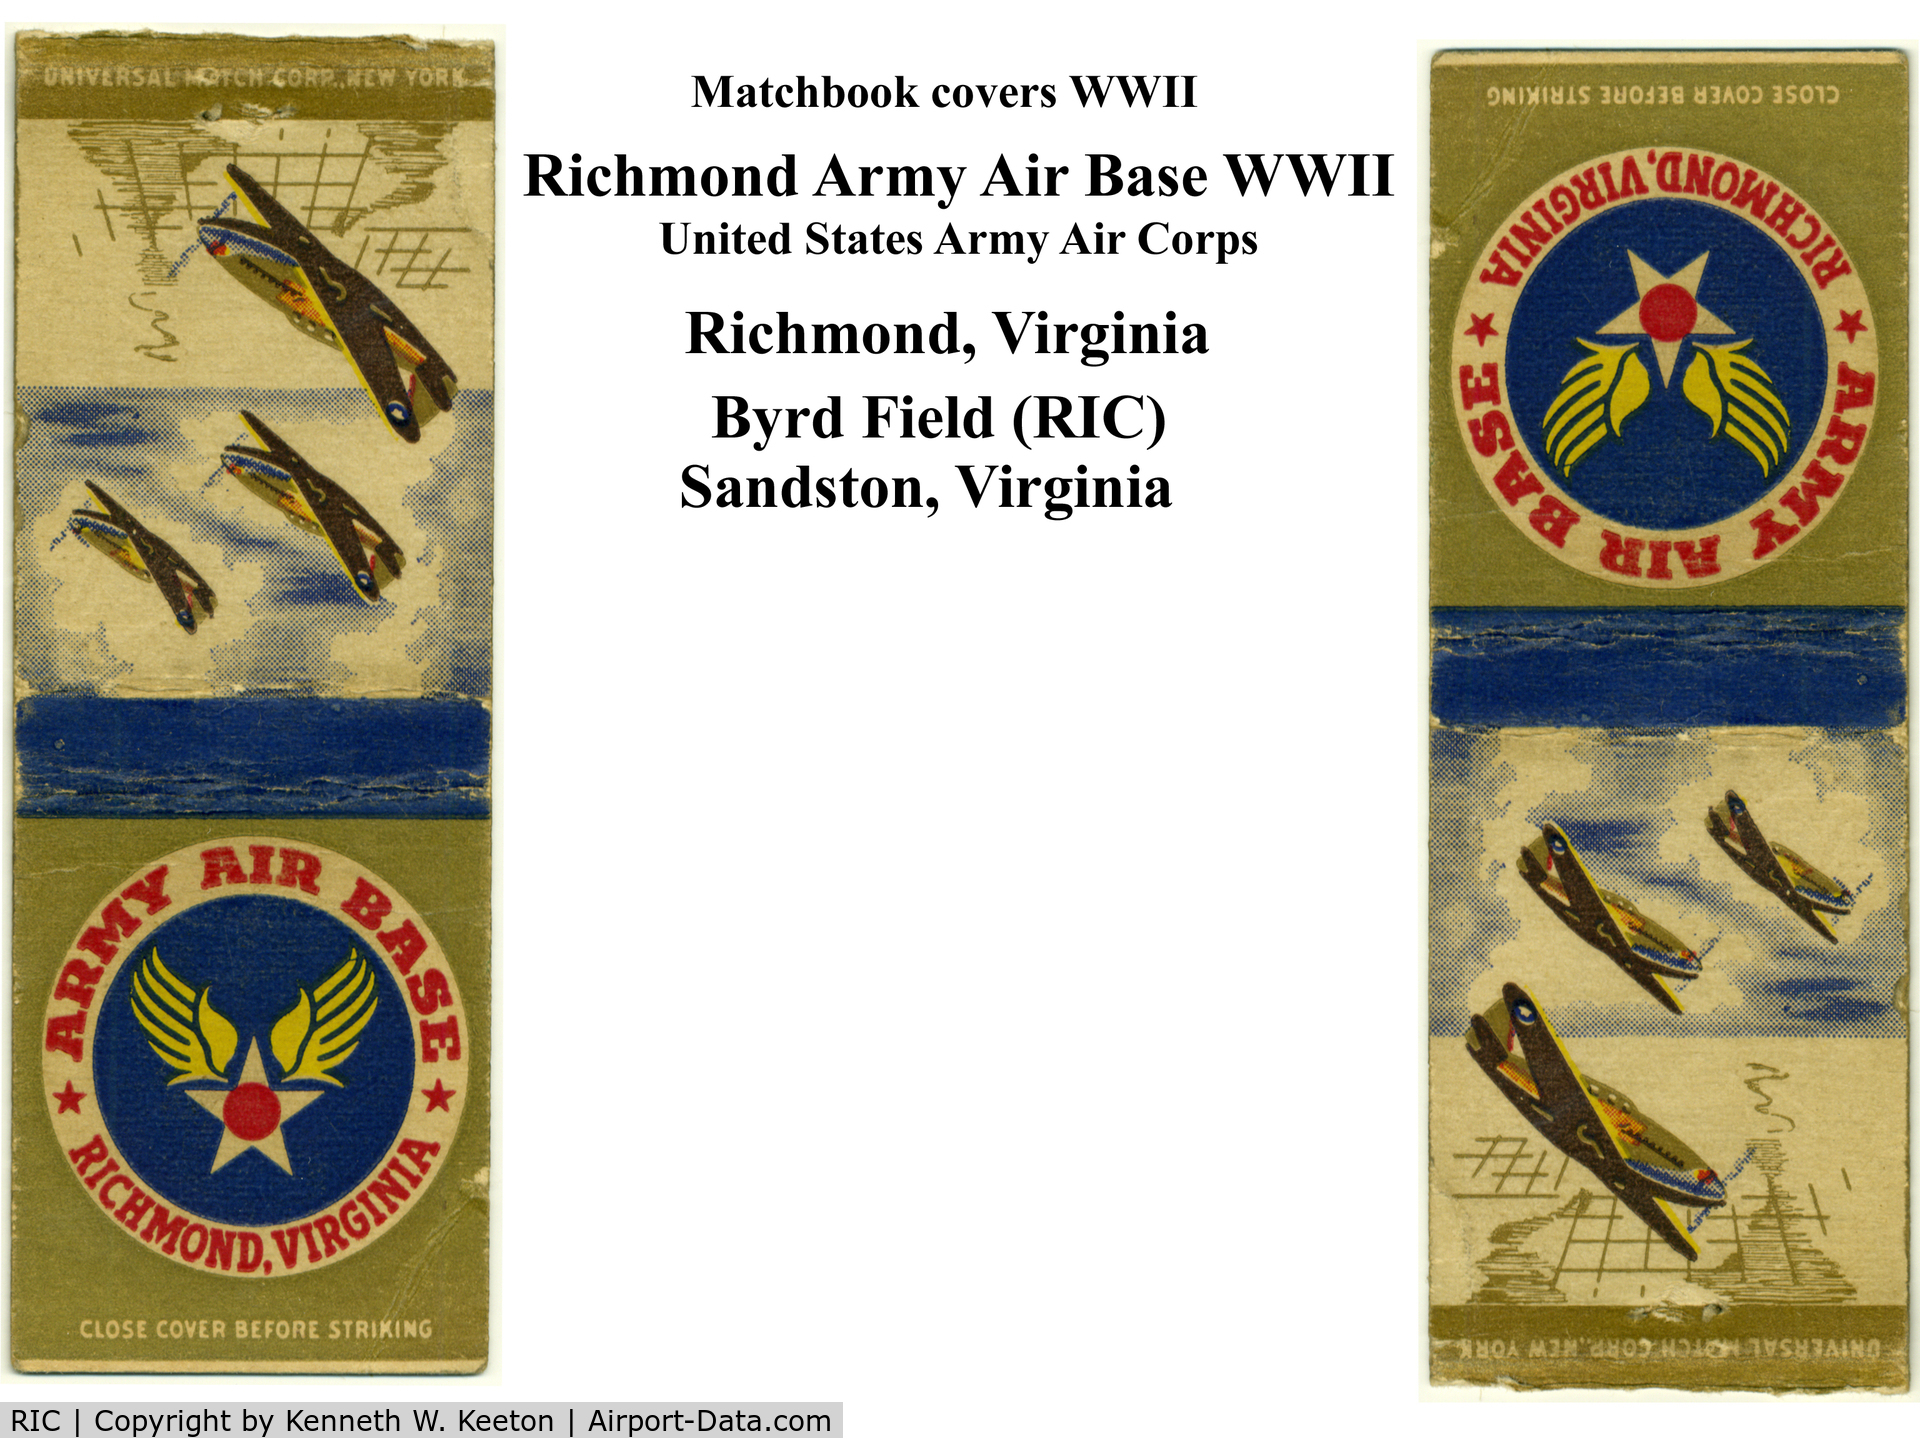 Richmond International Airport (RIC) - WWII matchbook covers of Richmond Army Airbase.